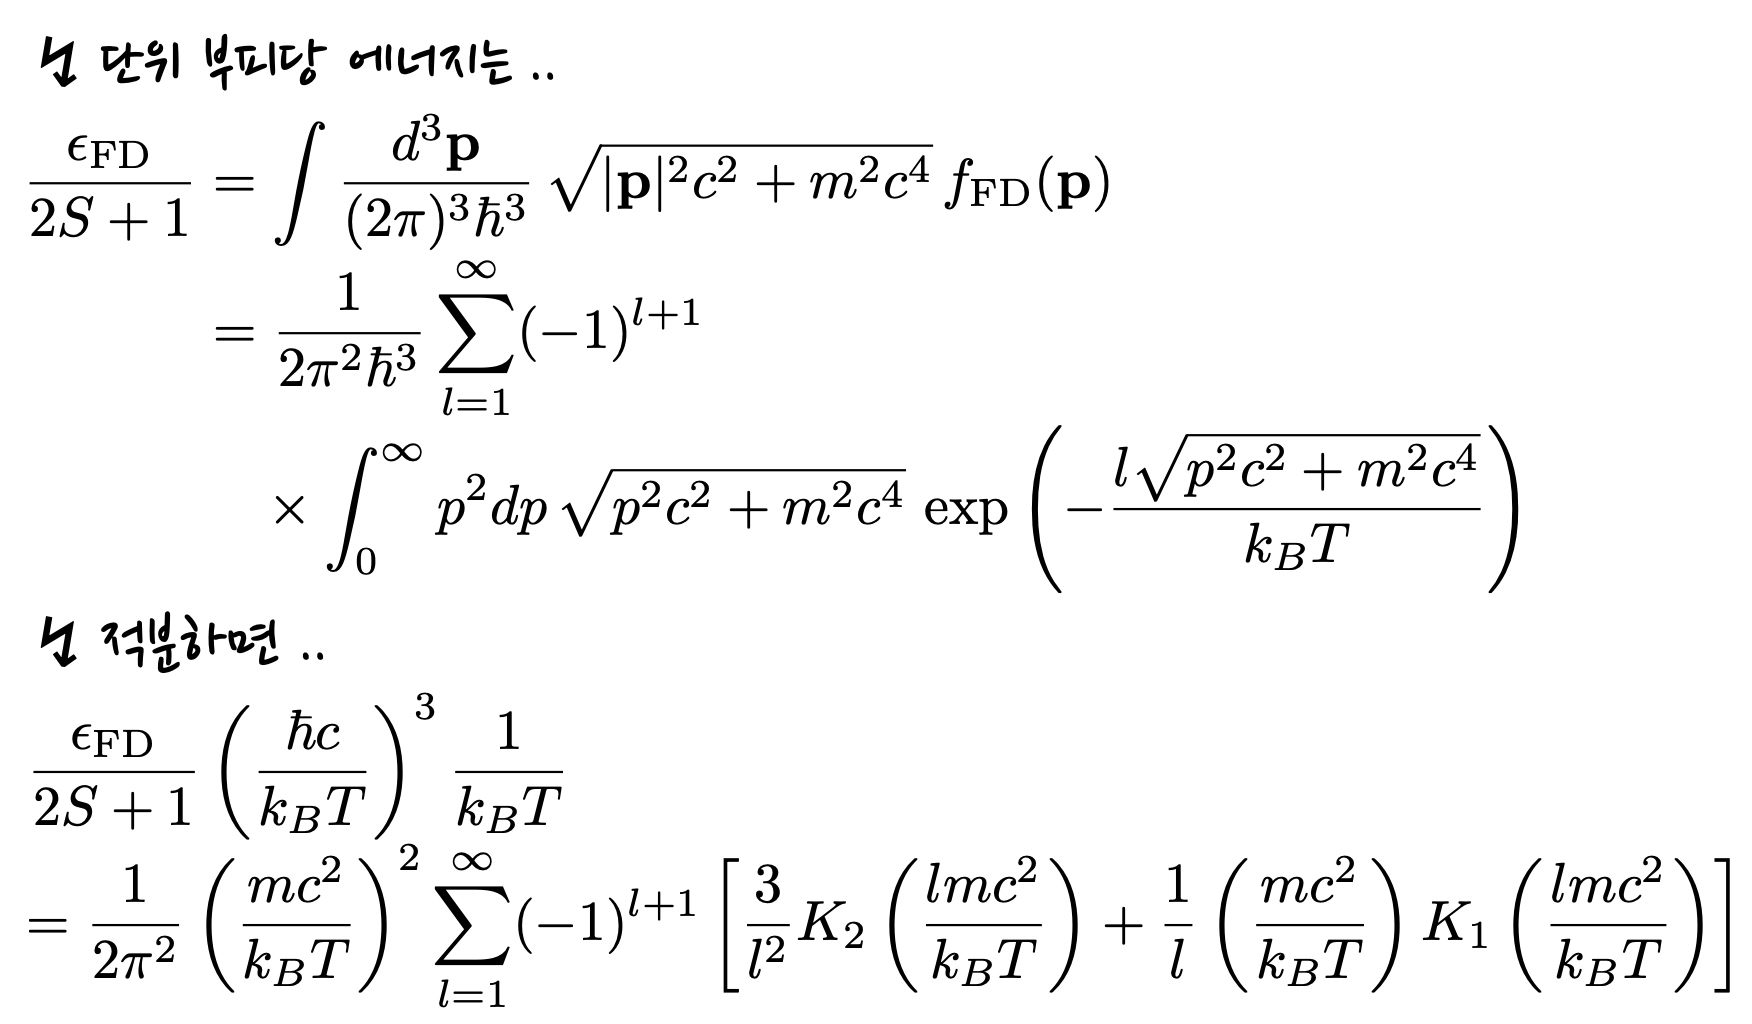 formulae for energy density of fermions, derived from relativistic Fermi-Dirac thermal distribution function